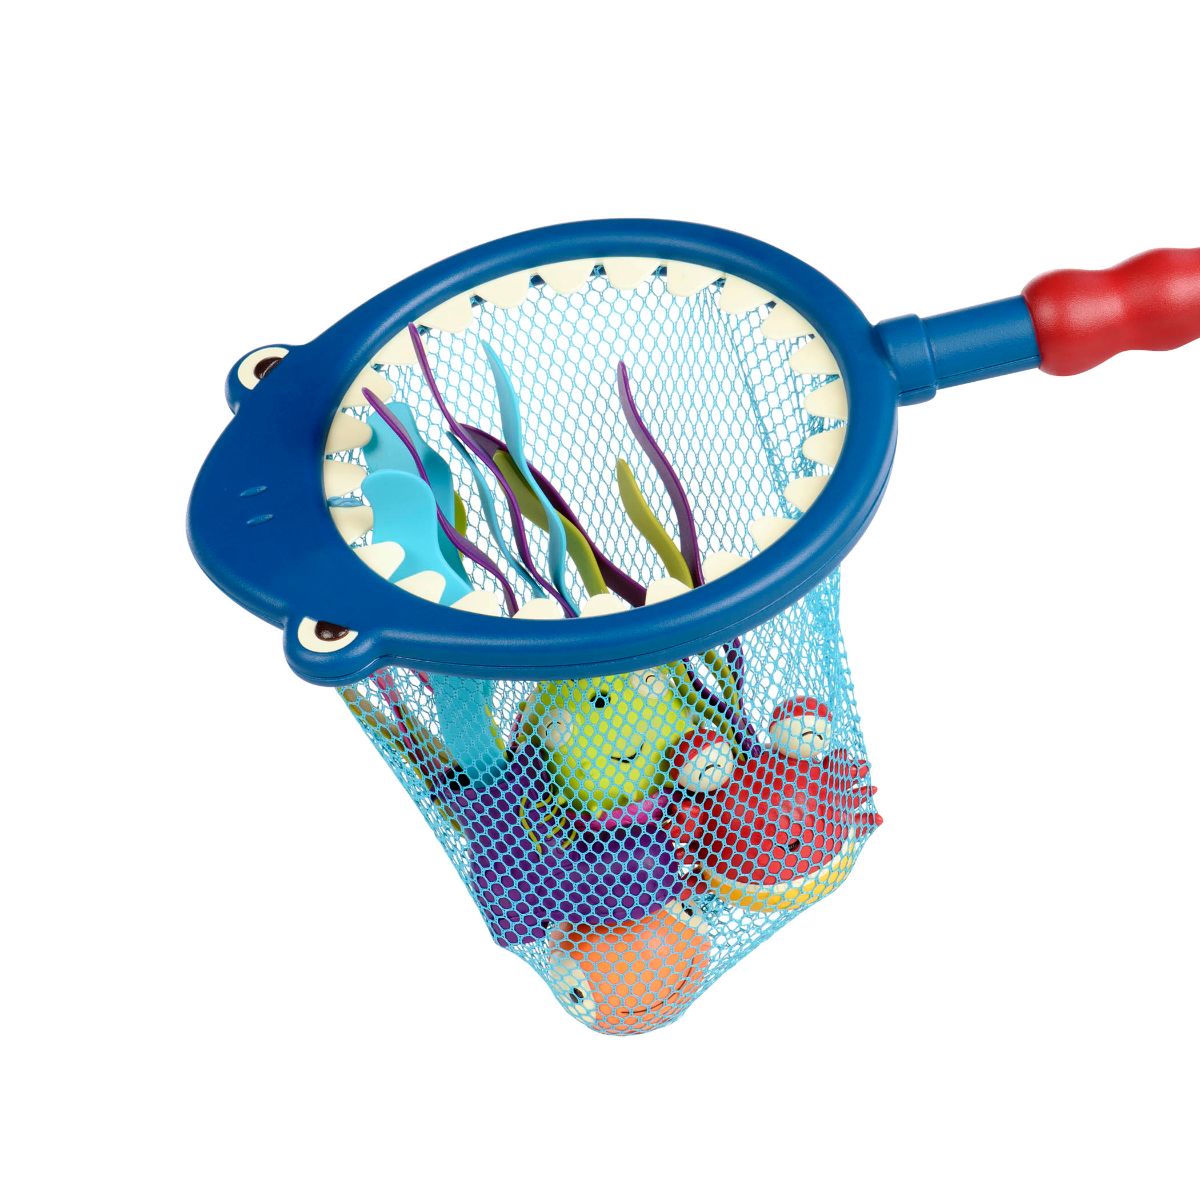 Scoop-A-Diving Set - Finley, Pool Toys